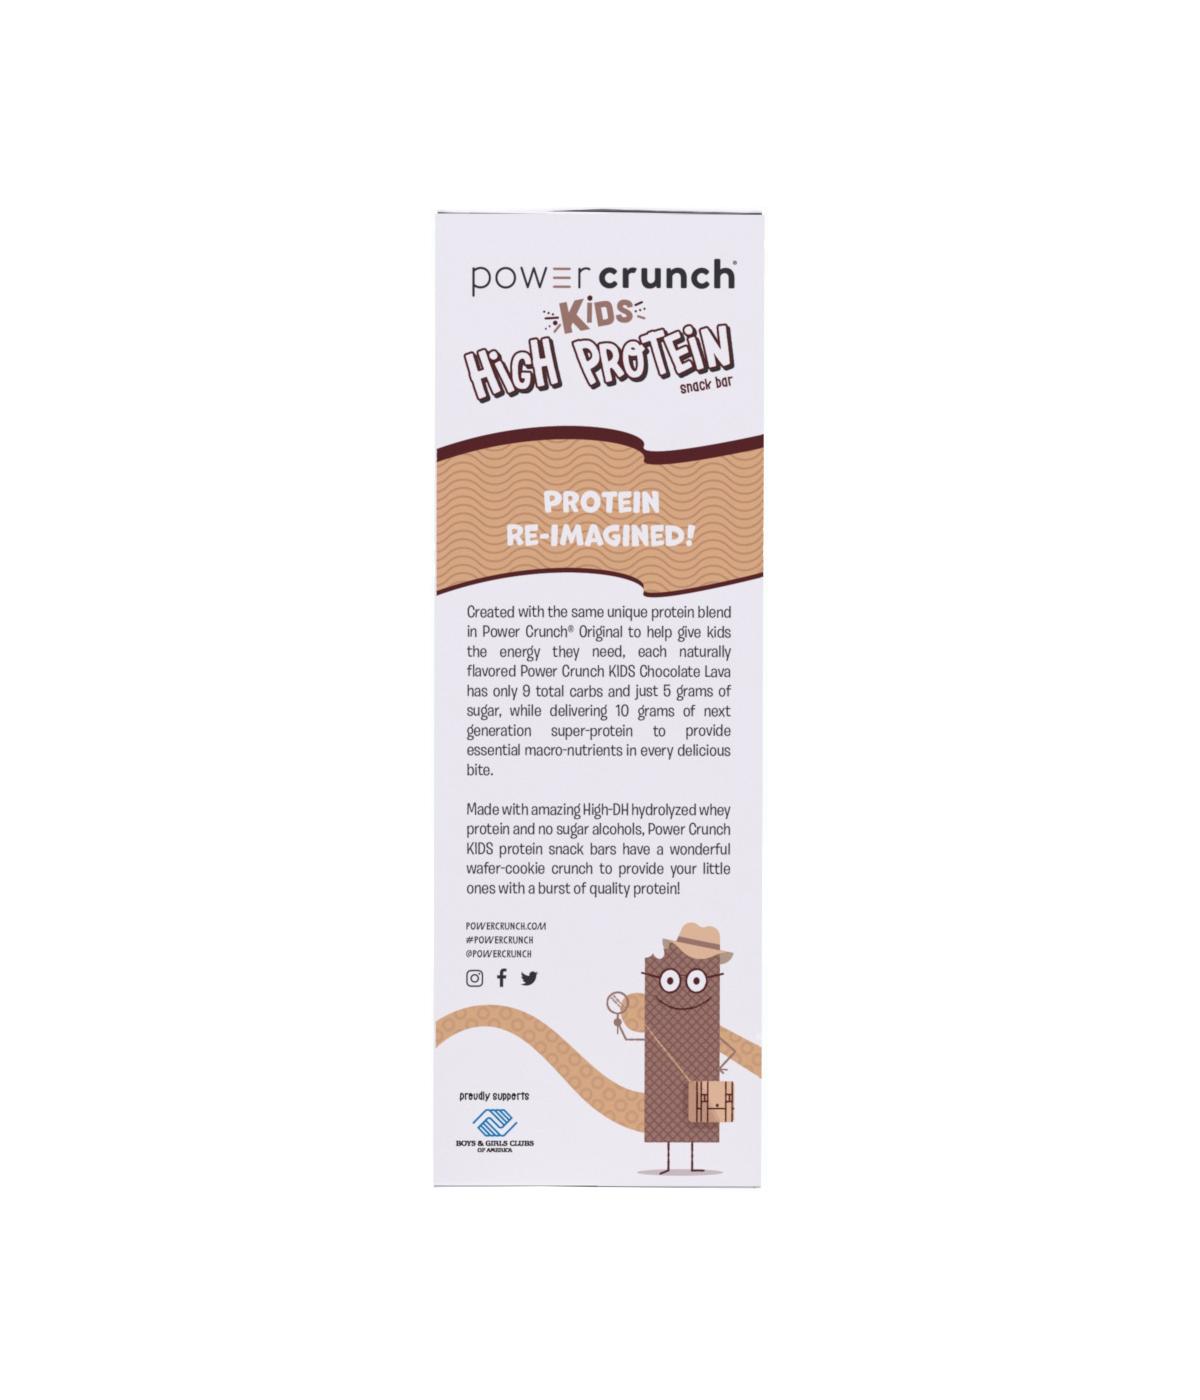 Power Crunch 10g Protein Bar - Kids Chocolate Lava; image 3 of 3